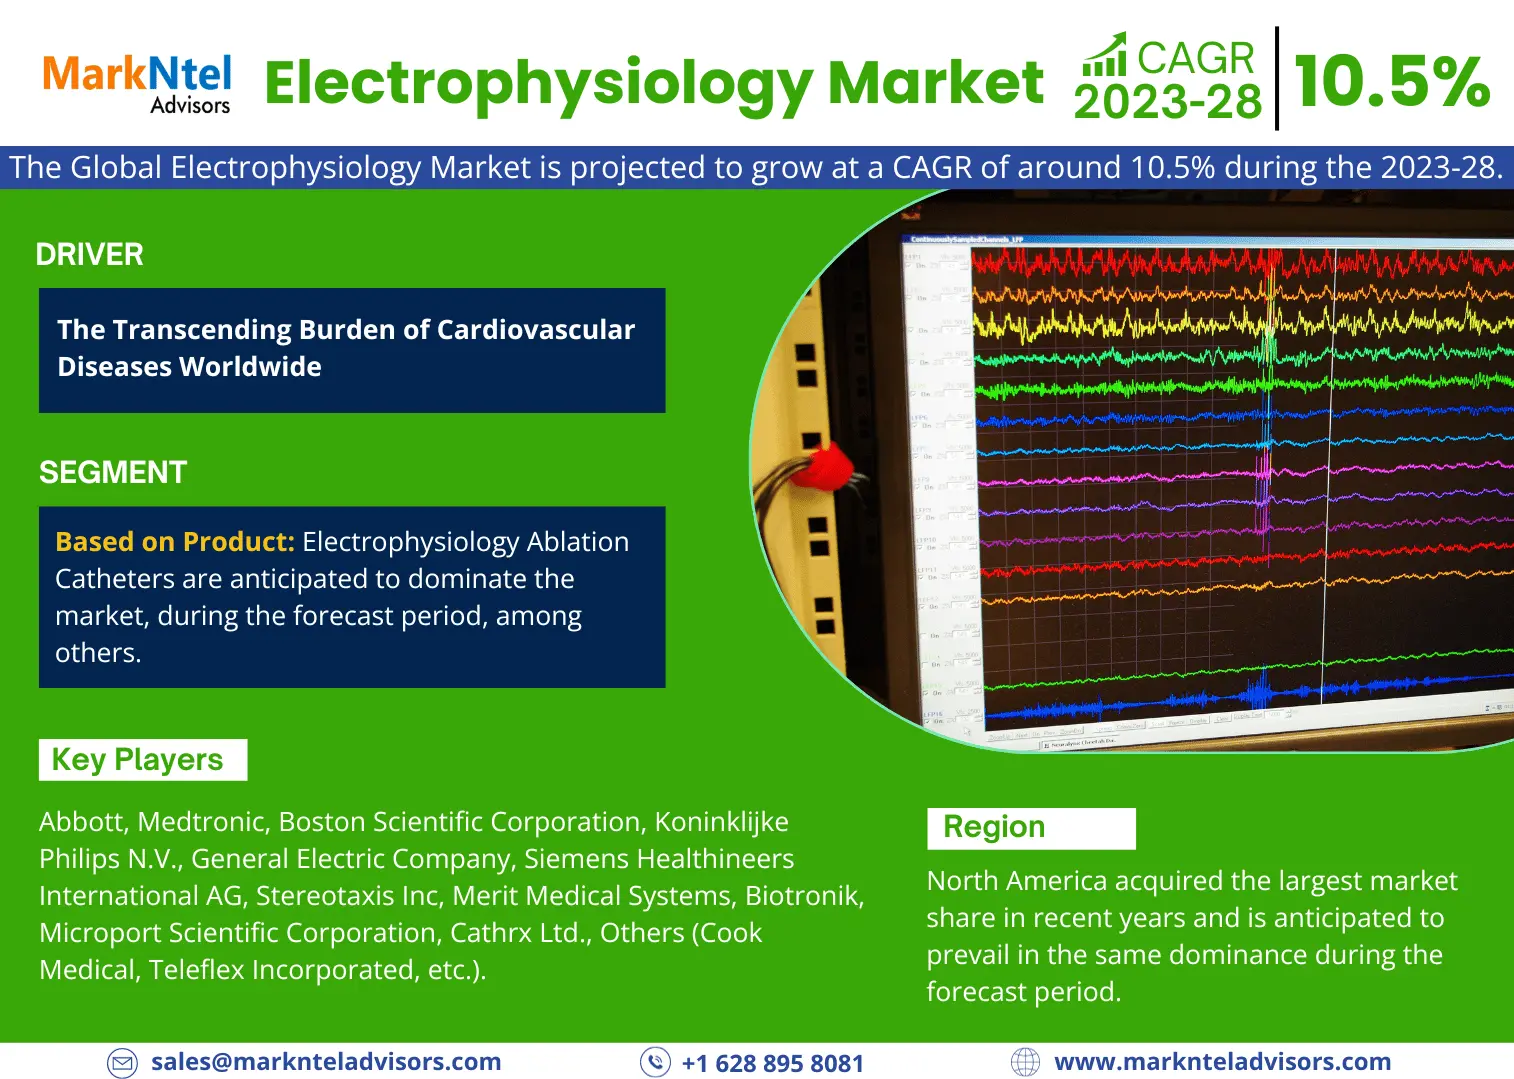 Electrophysiology Market 2028 Strategy Unveiled: Top Business Tactics, Growth Factors, and Healthy CAGR Across Industry Segments